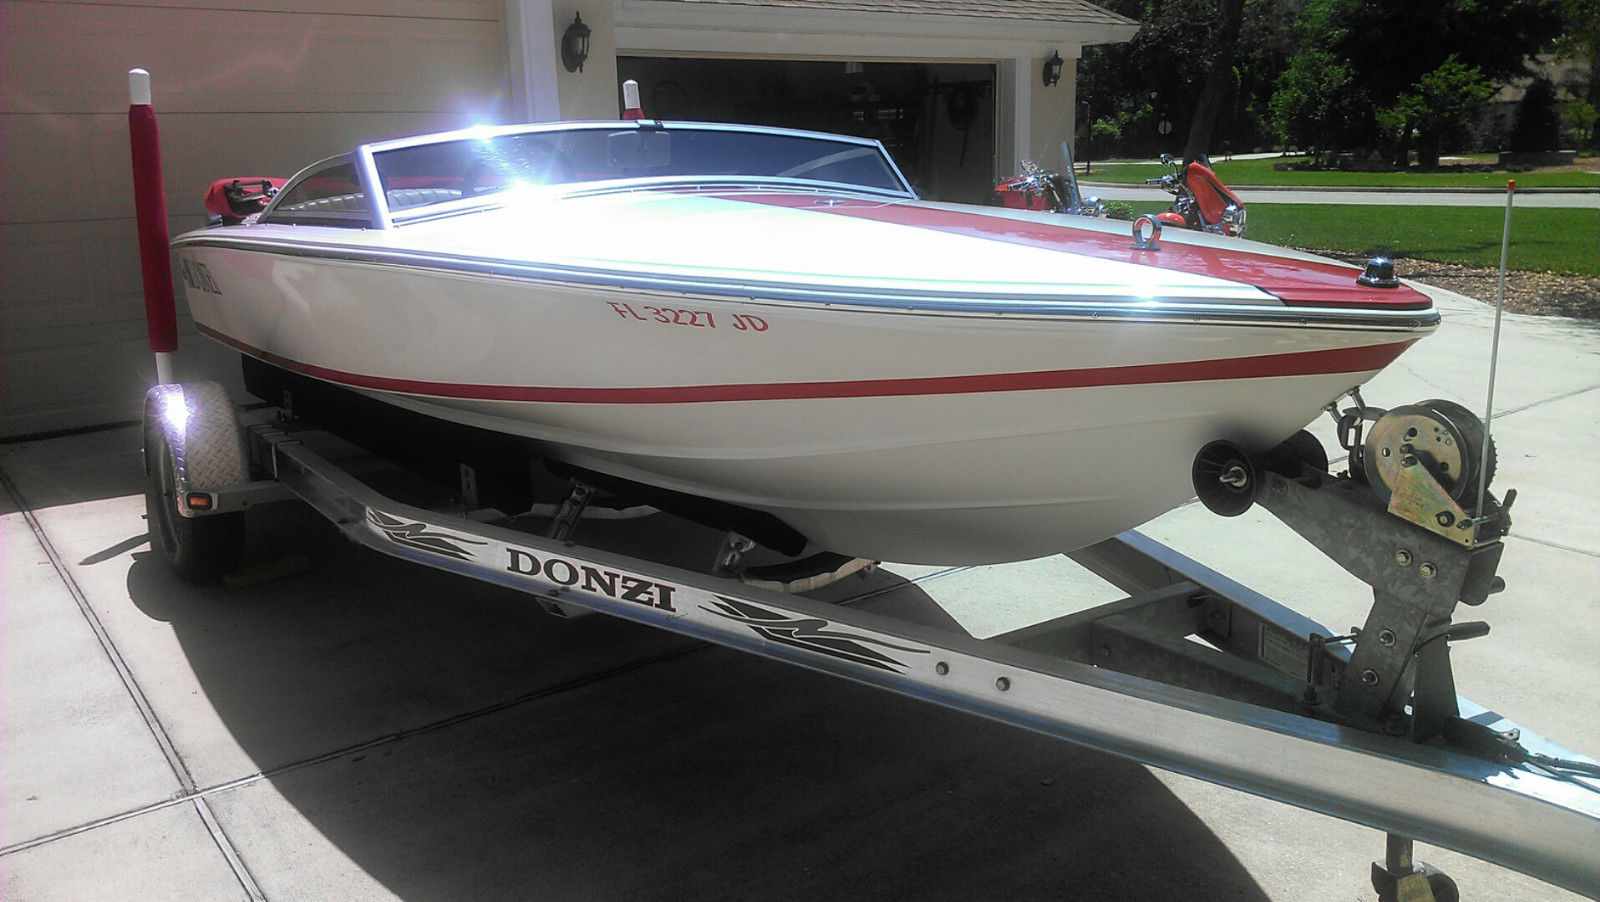 Donzi 18 Classic 1994 for sale for $19,900 - Boats-from ...